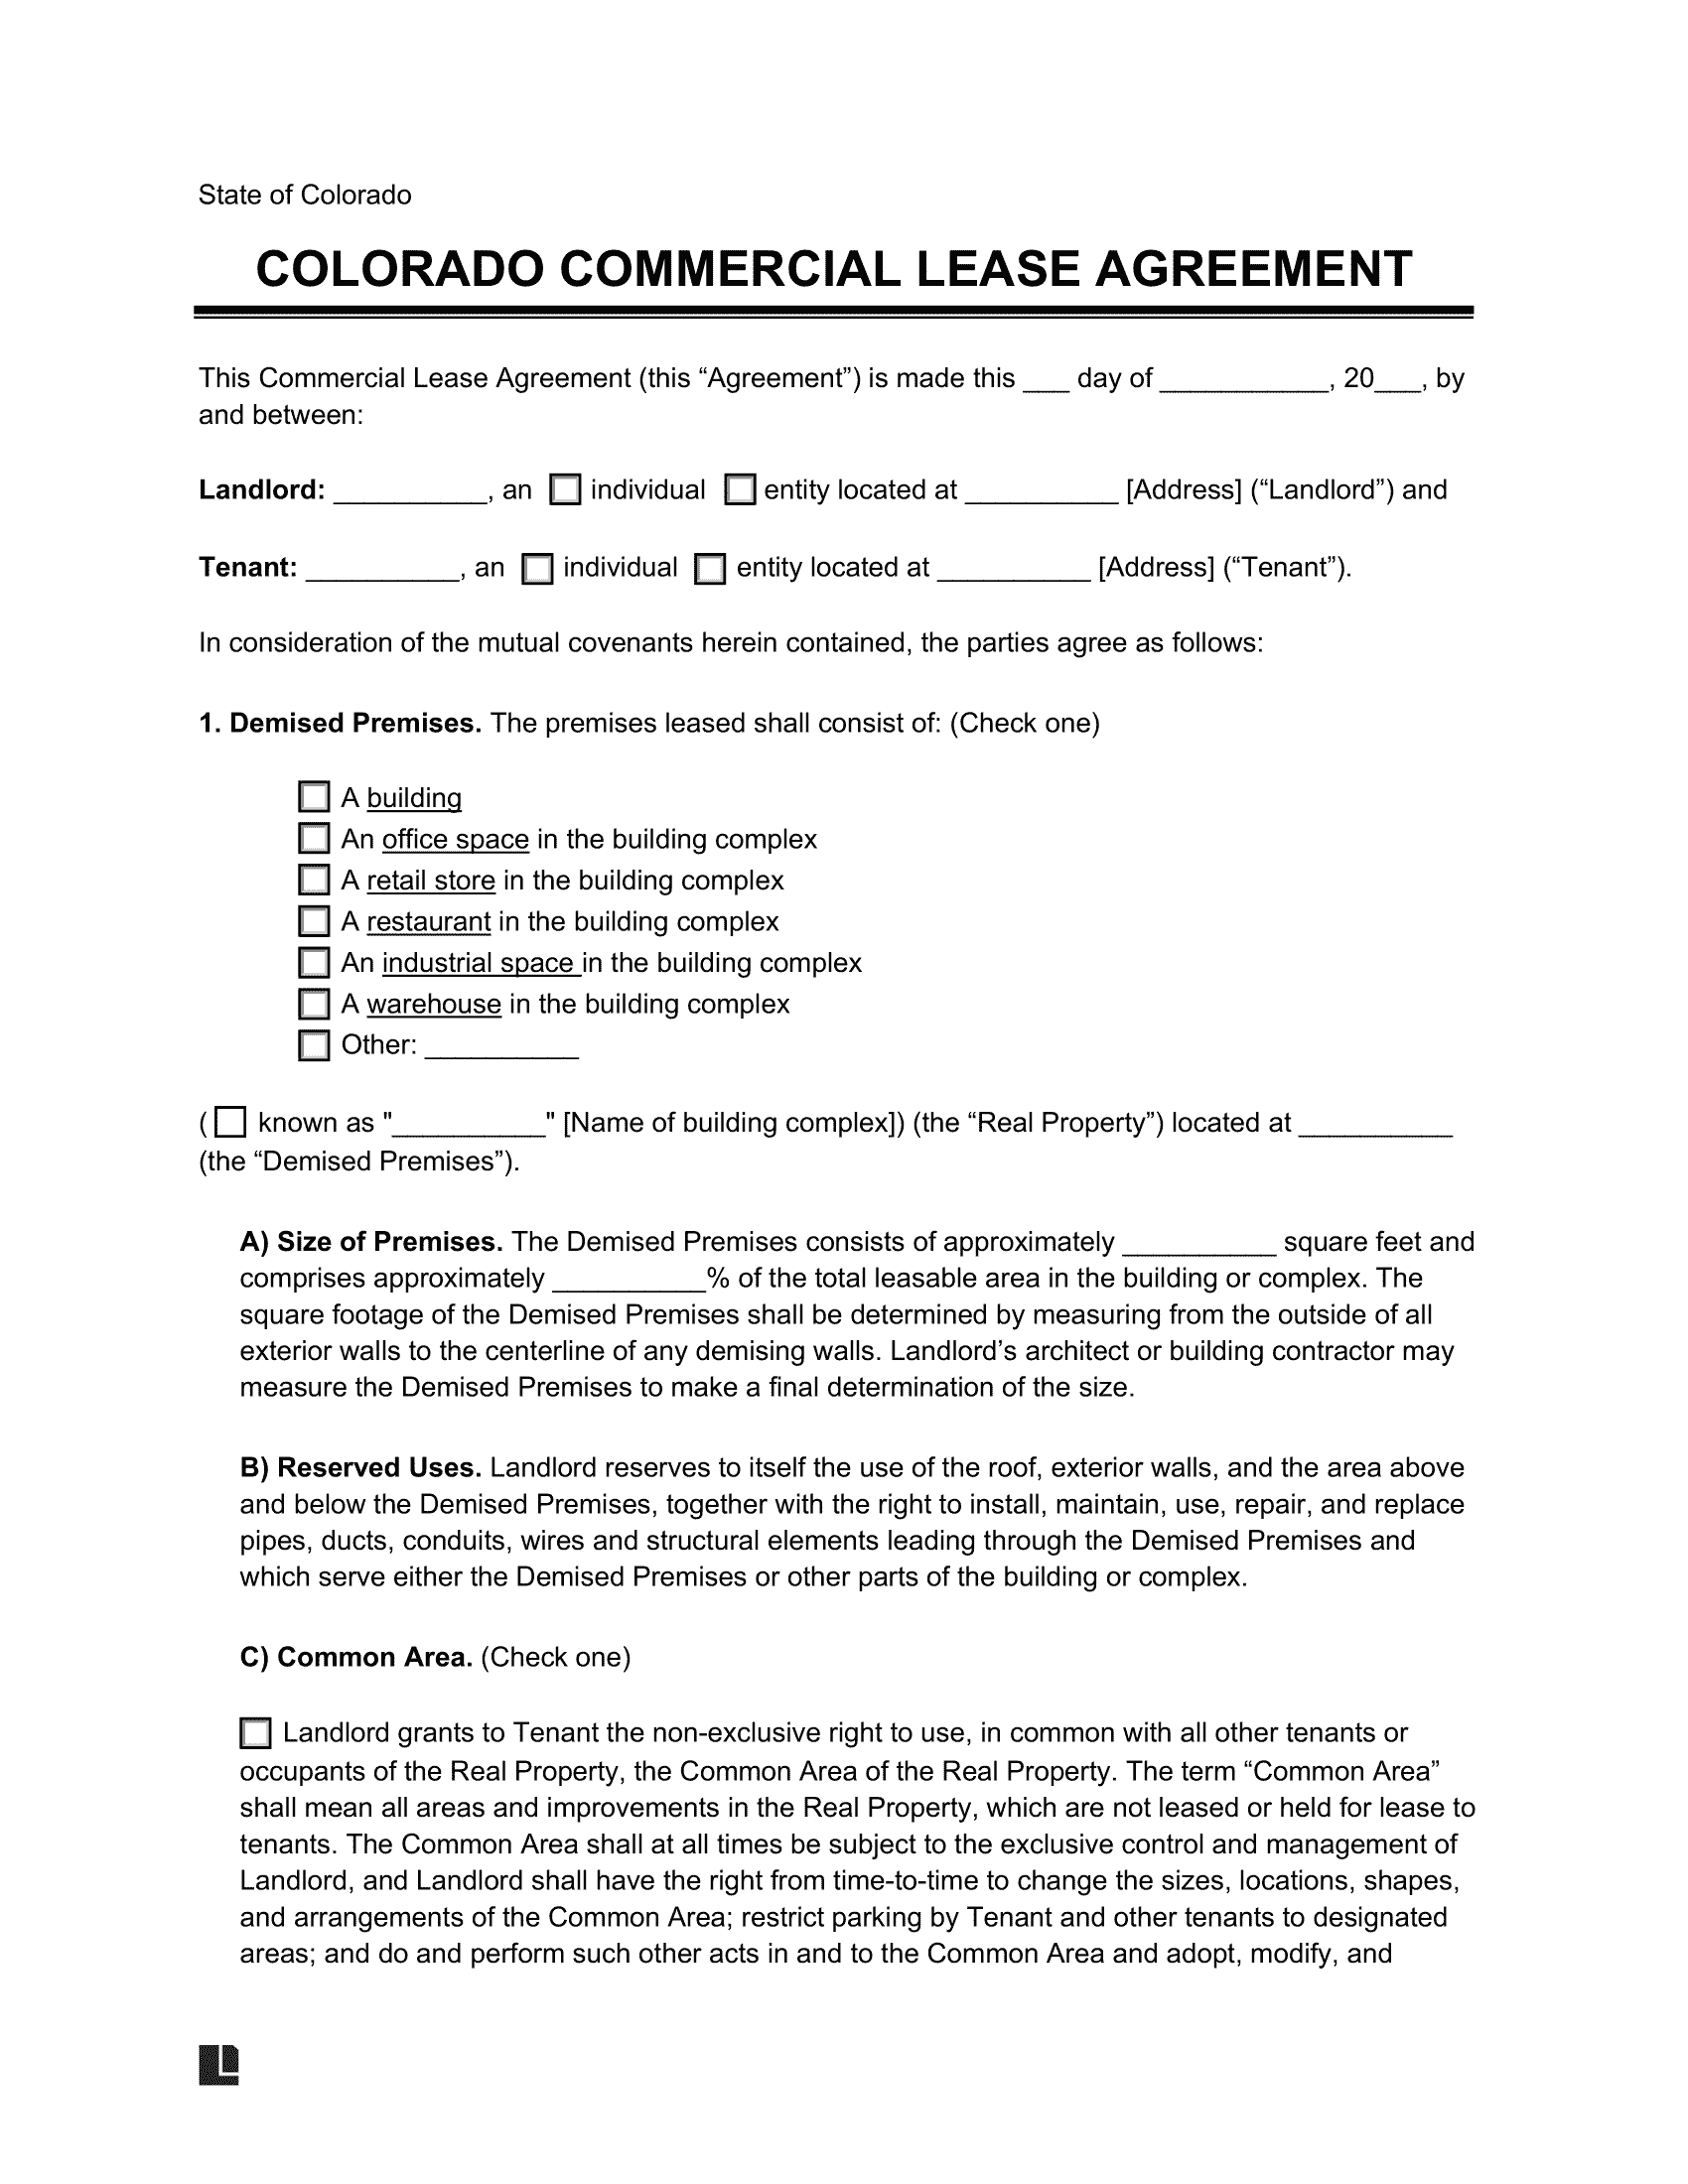 Colorado Commercial Lease Agreement